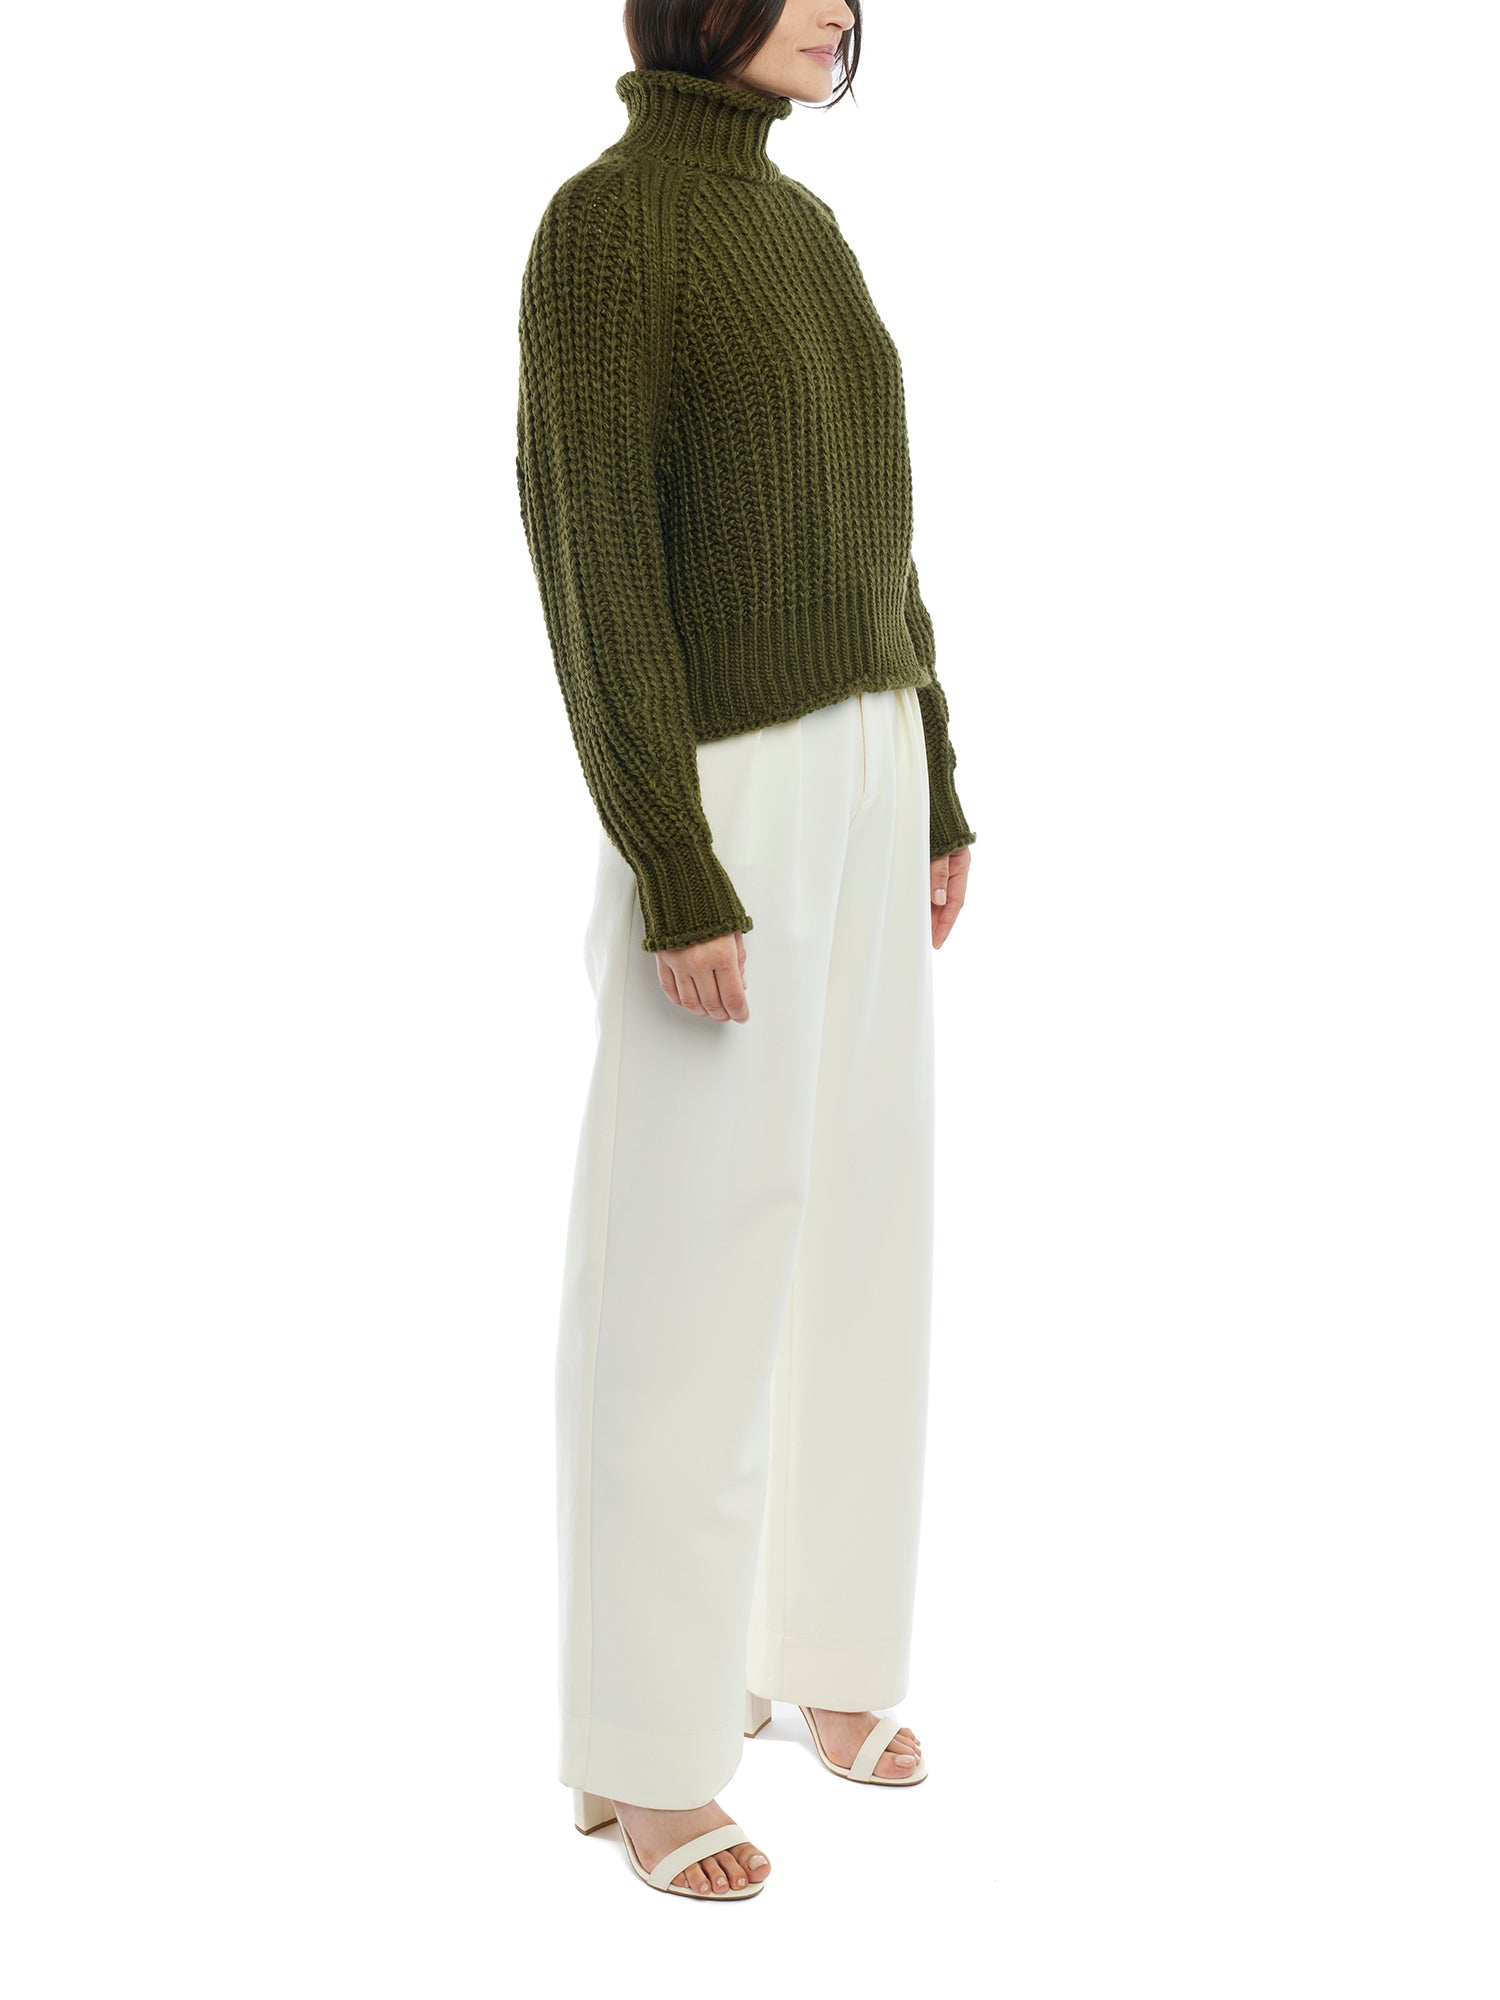 ribbed, chunky knit turtleneck sweater featuring slight balloon sleeves and a funnel neck in olive